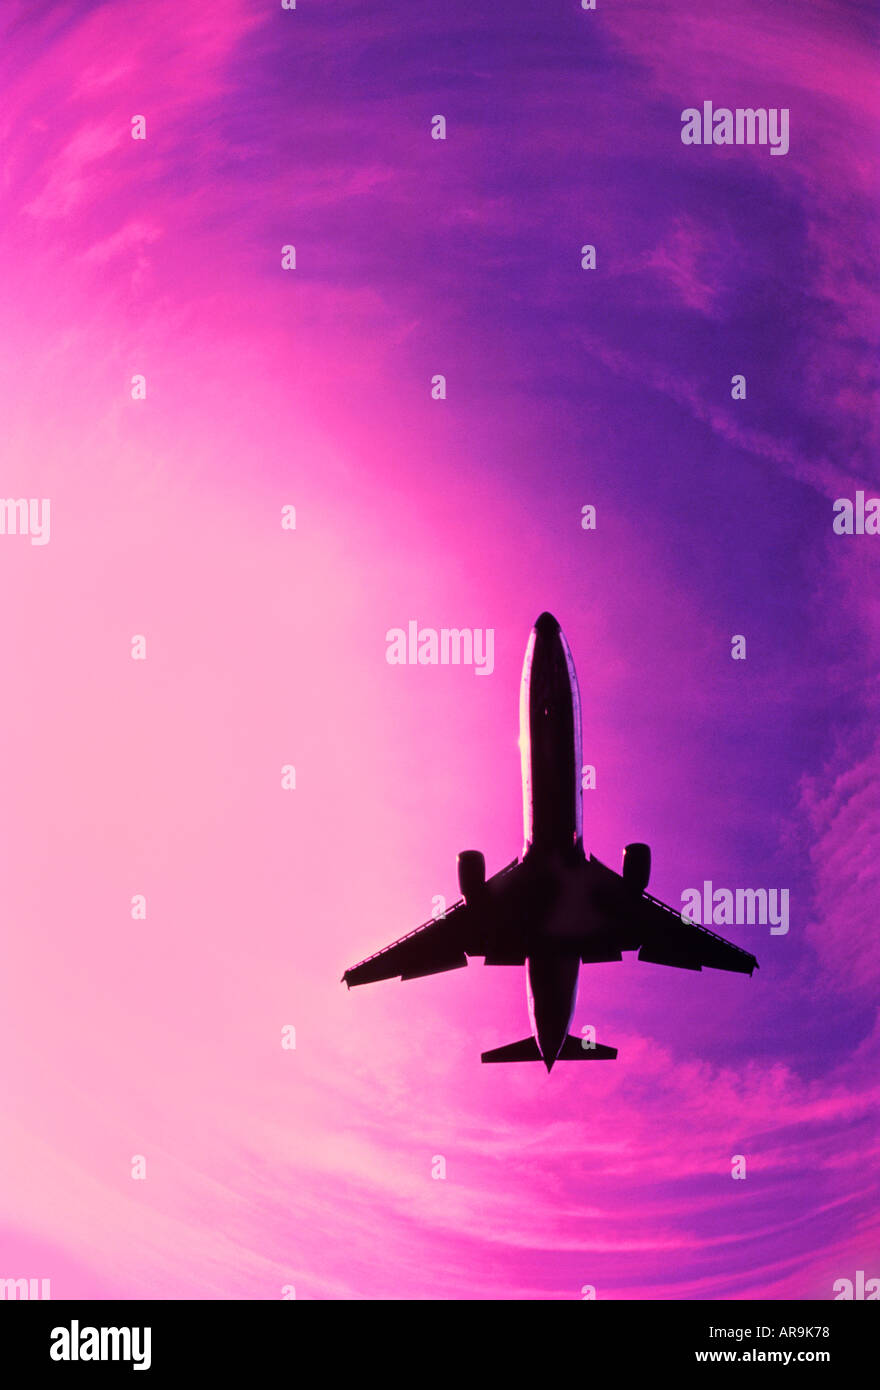 Boeing MD-11 jumbo jet airliner pink purple sky at cruising altitude aero engines wings Stock Photo